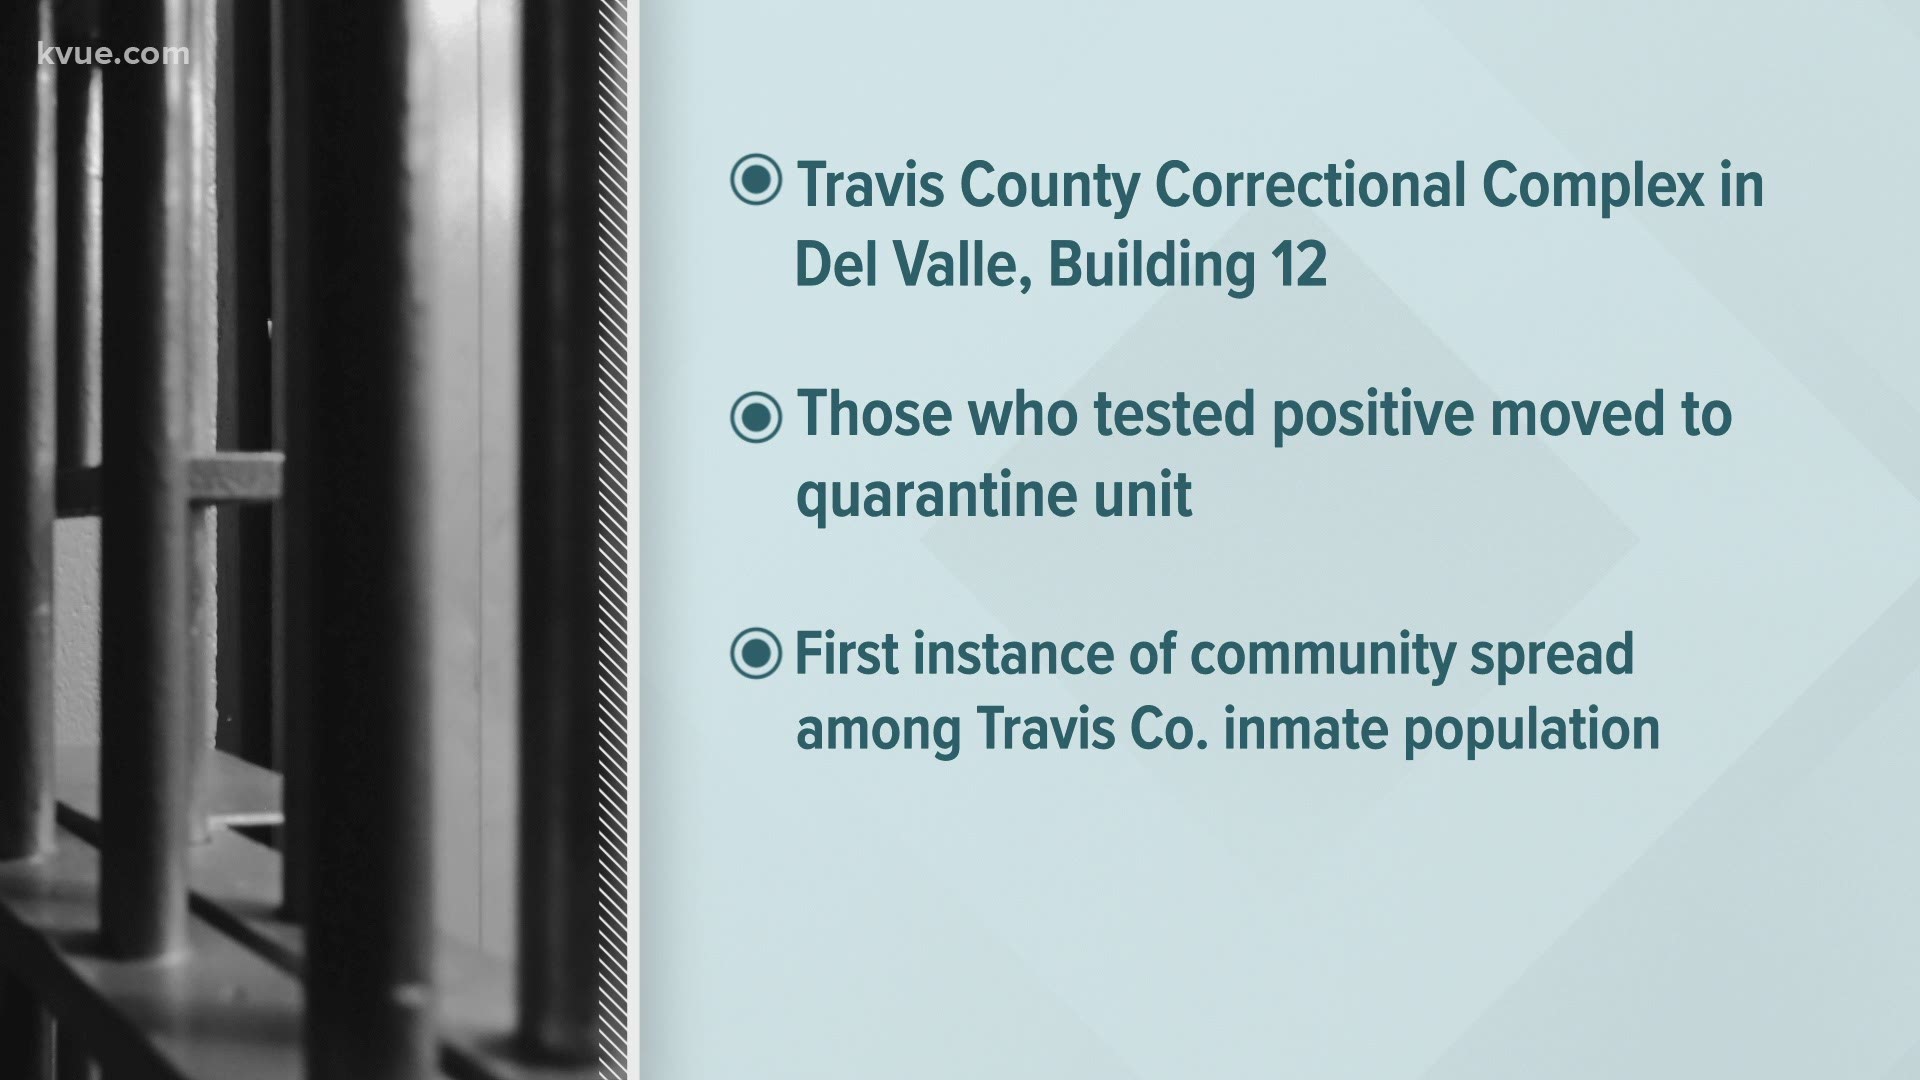 It is the first instance of community spread in Travis County's jail system.